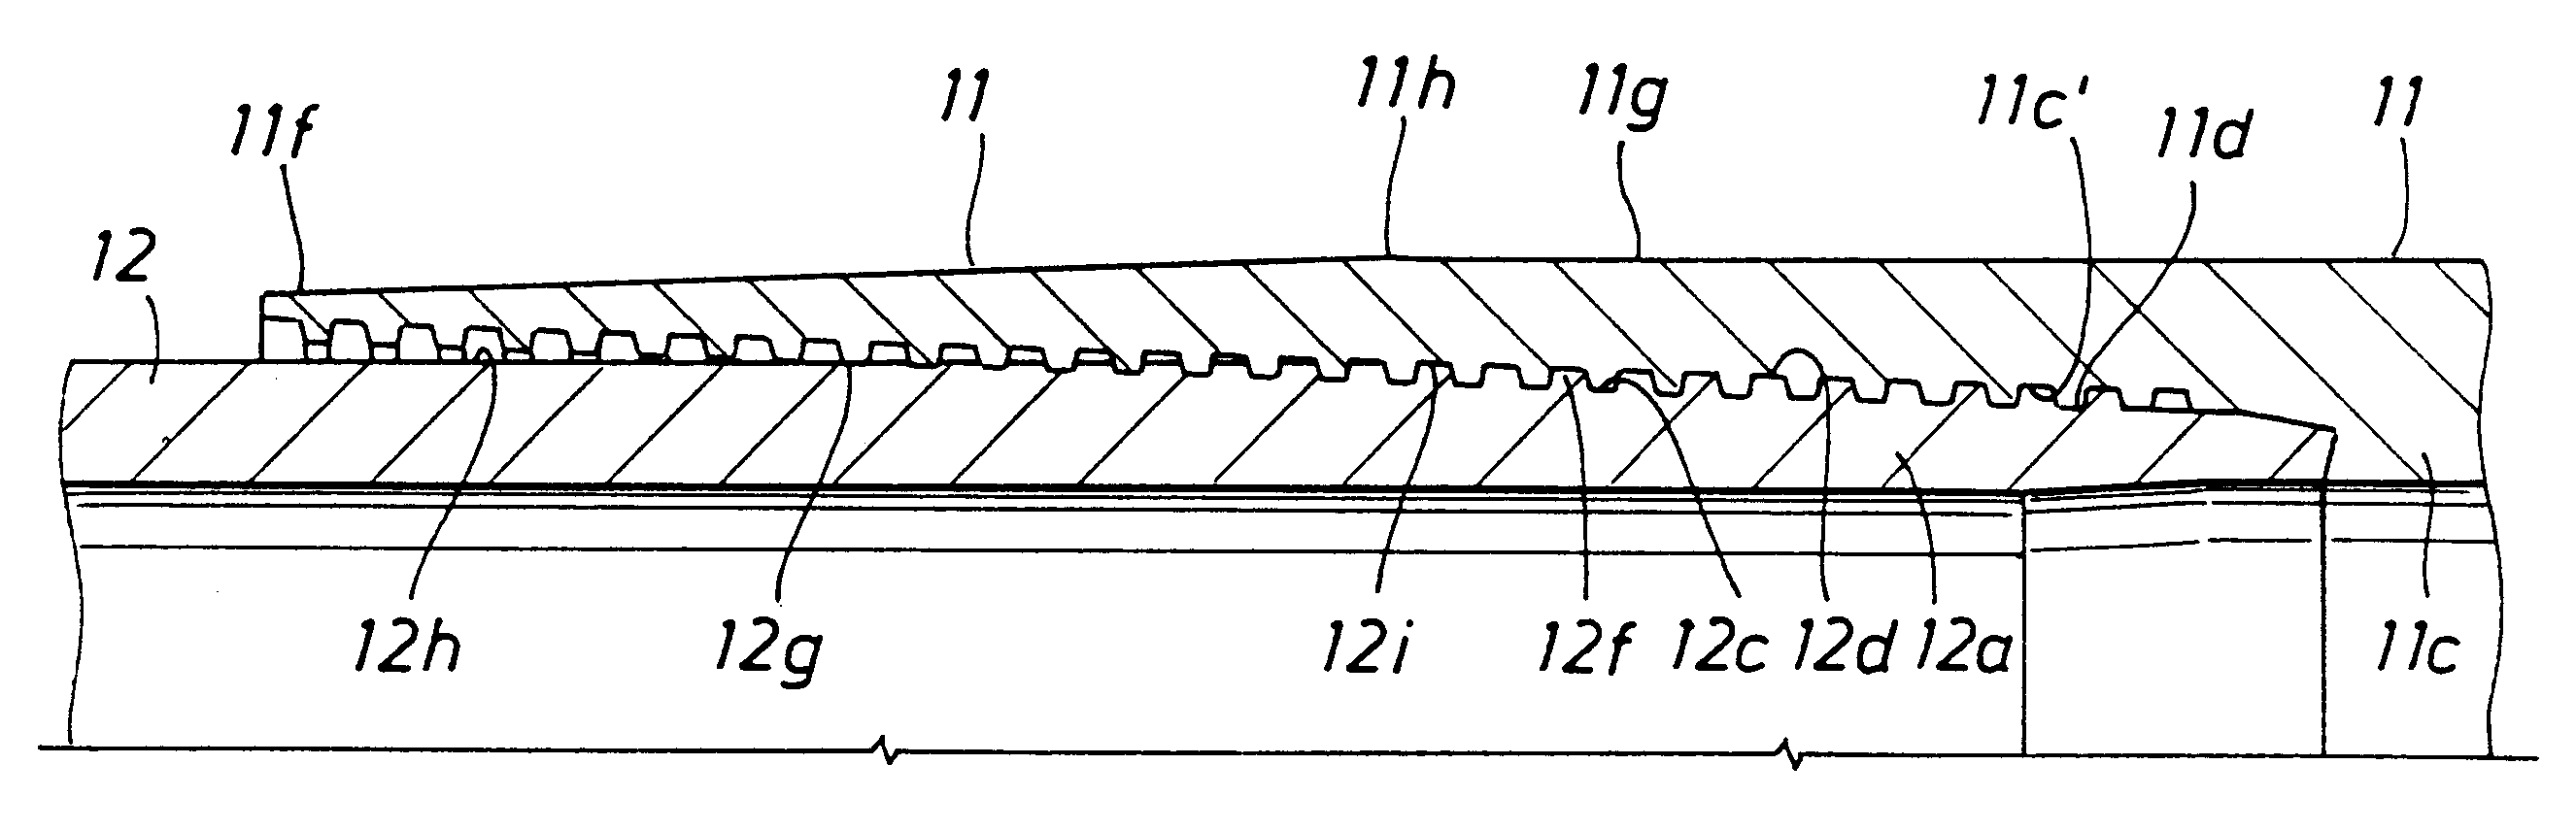 Threaded and coupled connection for improved fatigue resistance